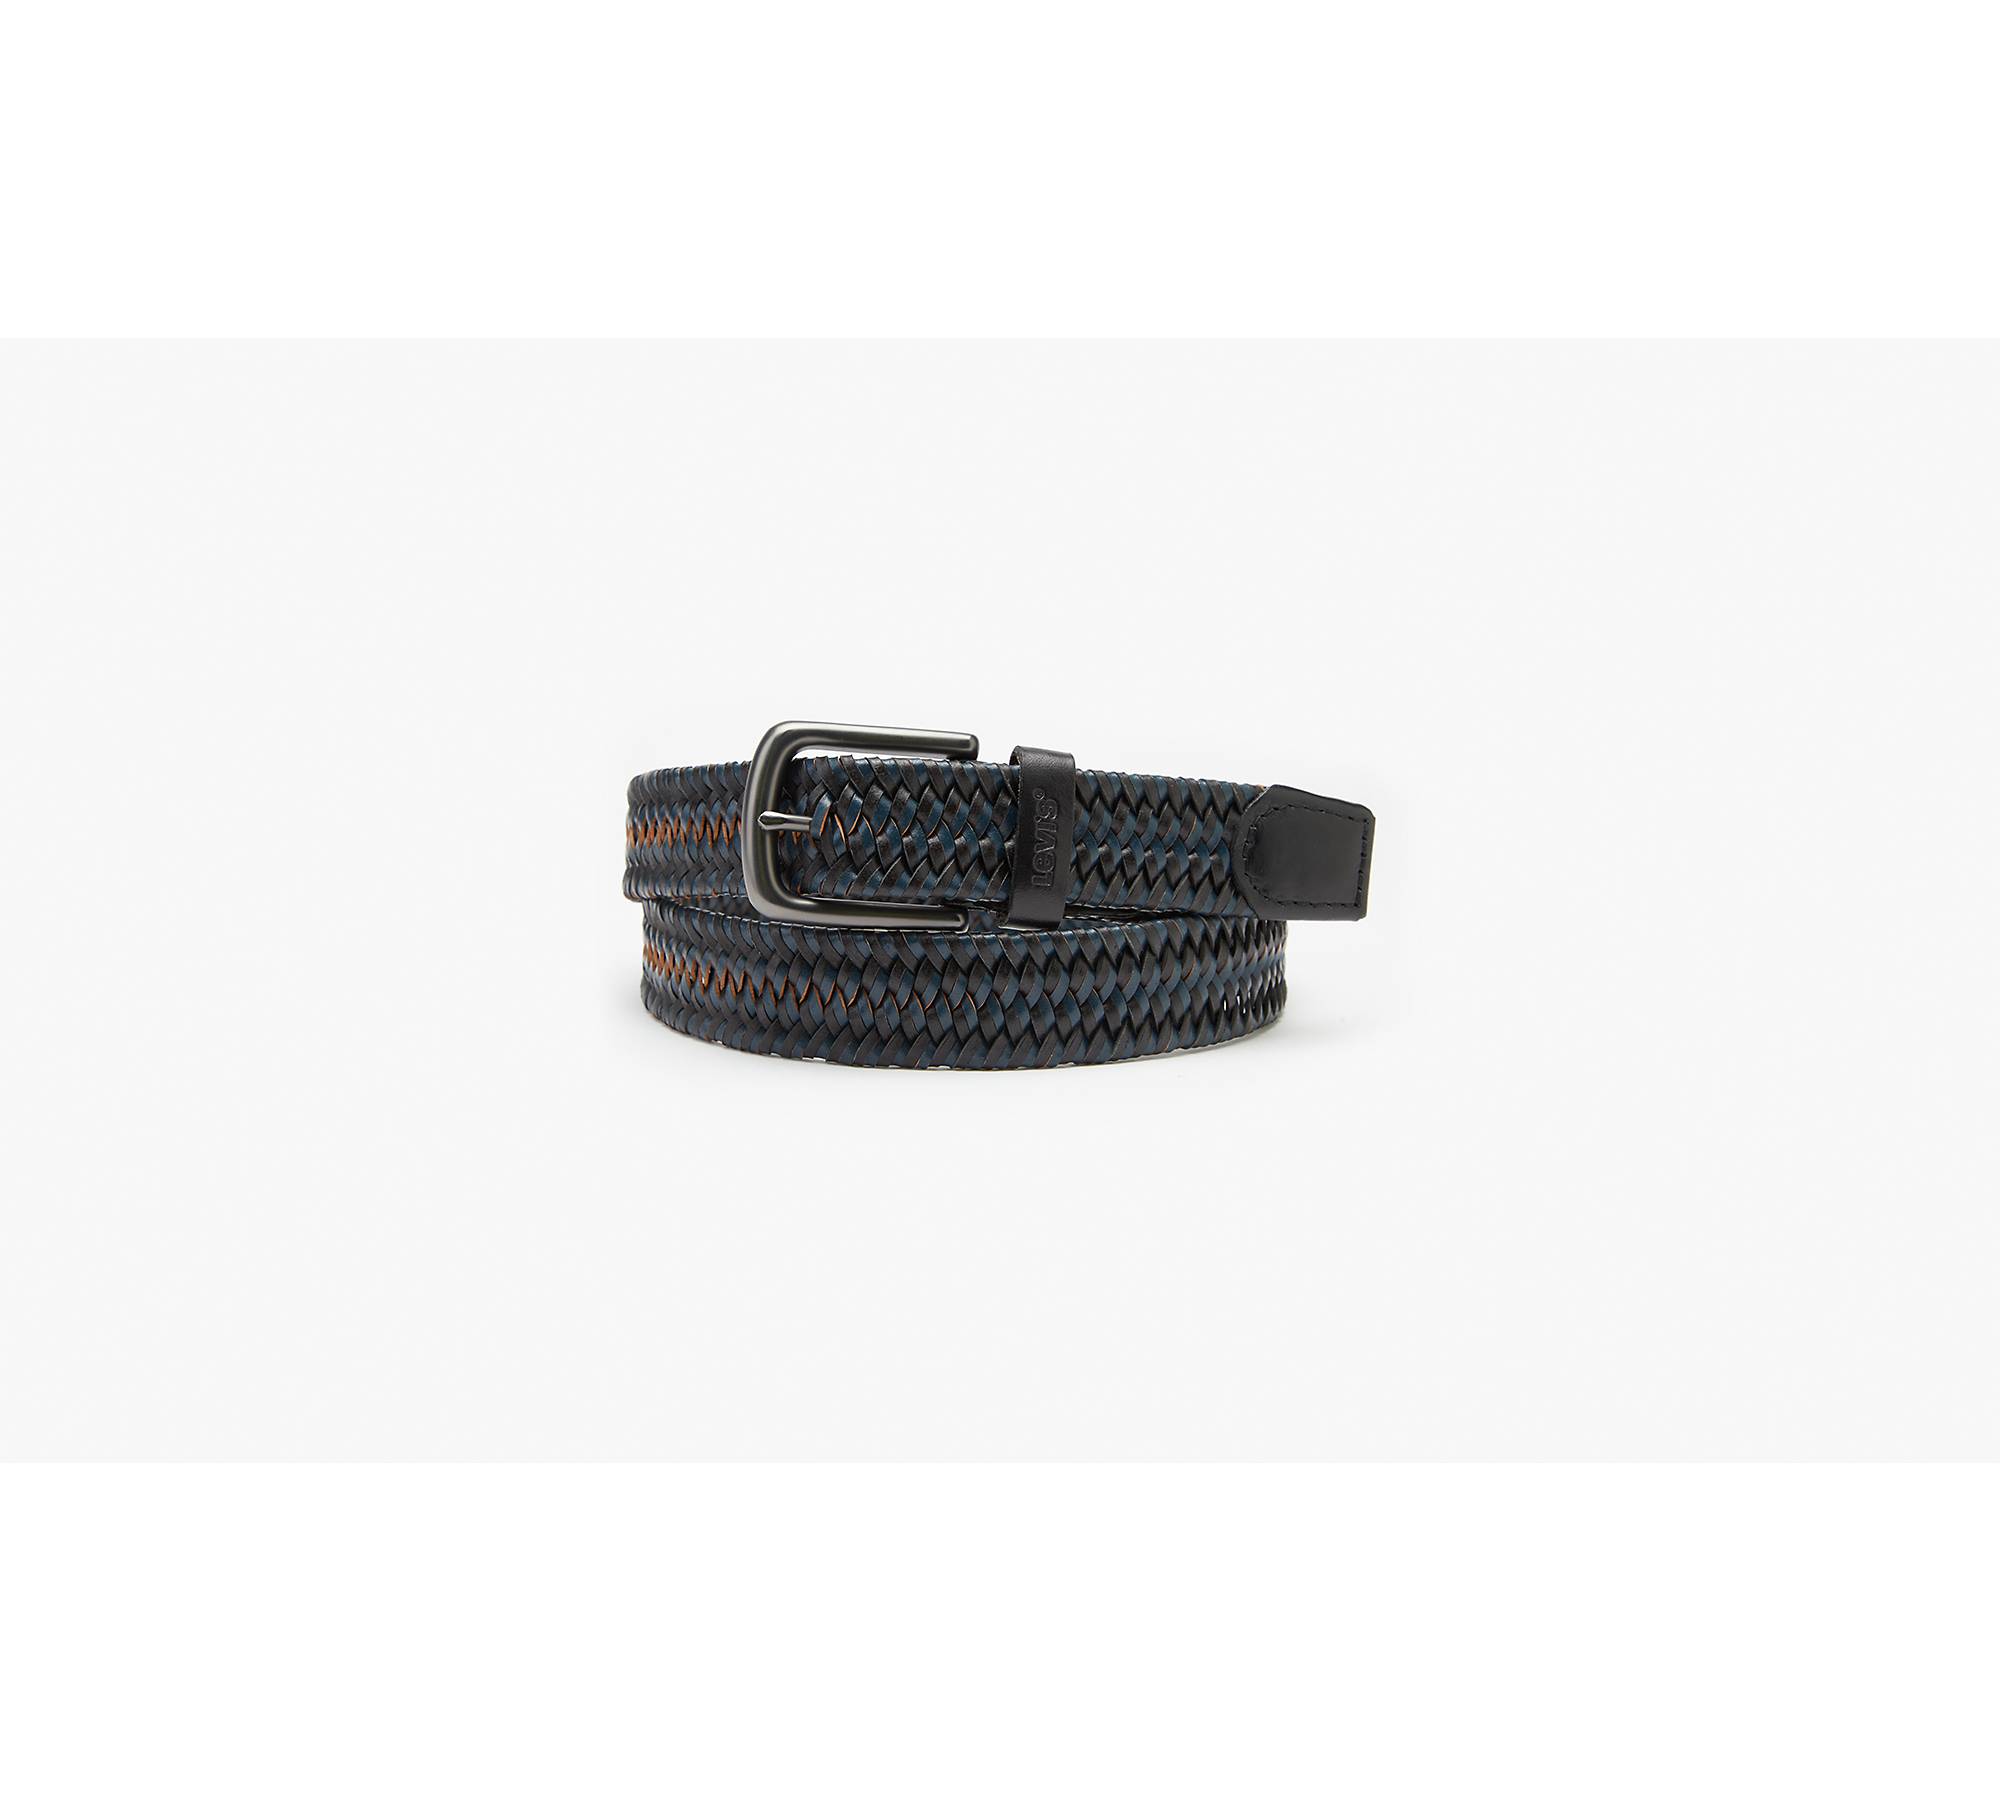 Stretch Woven Belt - Levi's Jeans, Jackets & Clothing